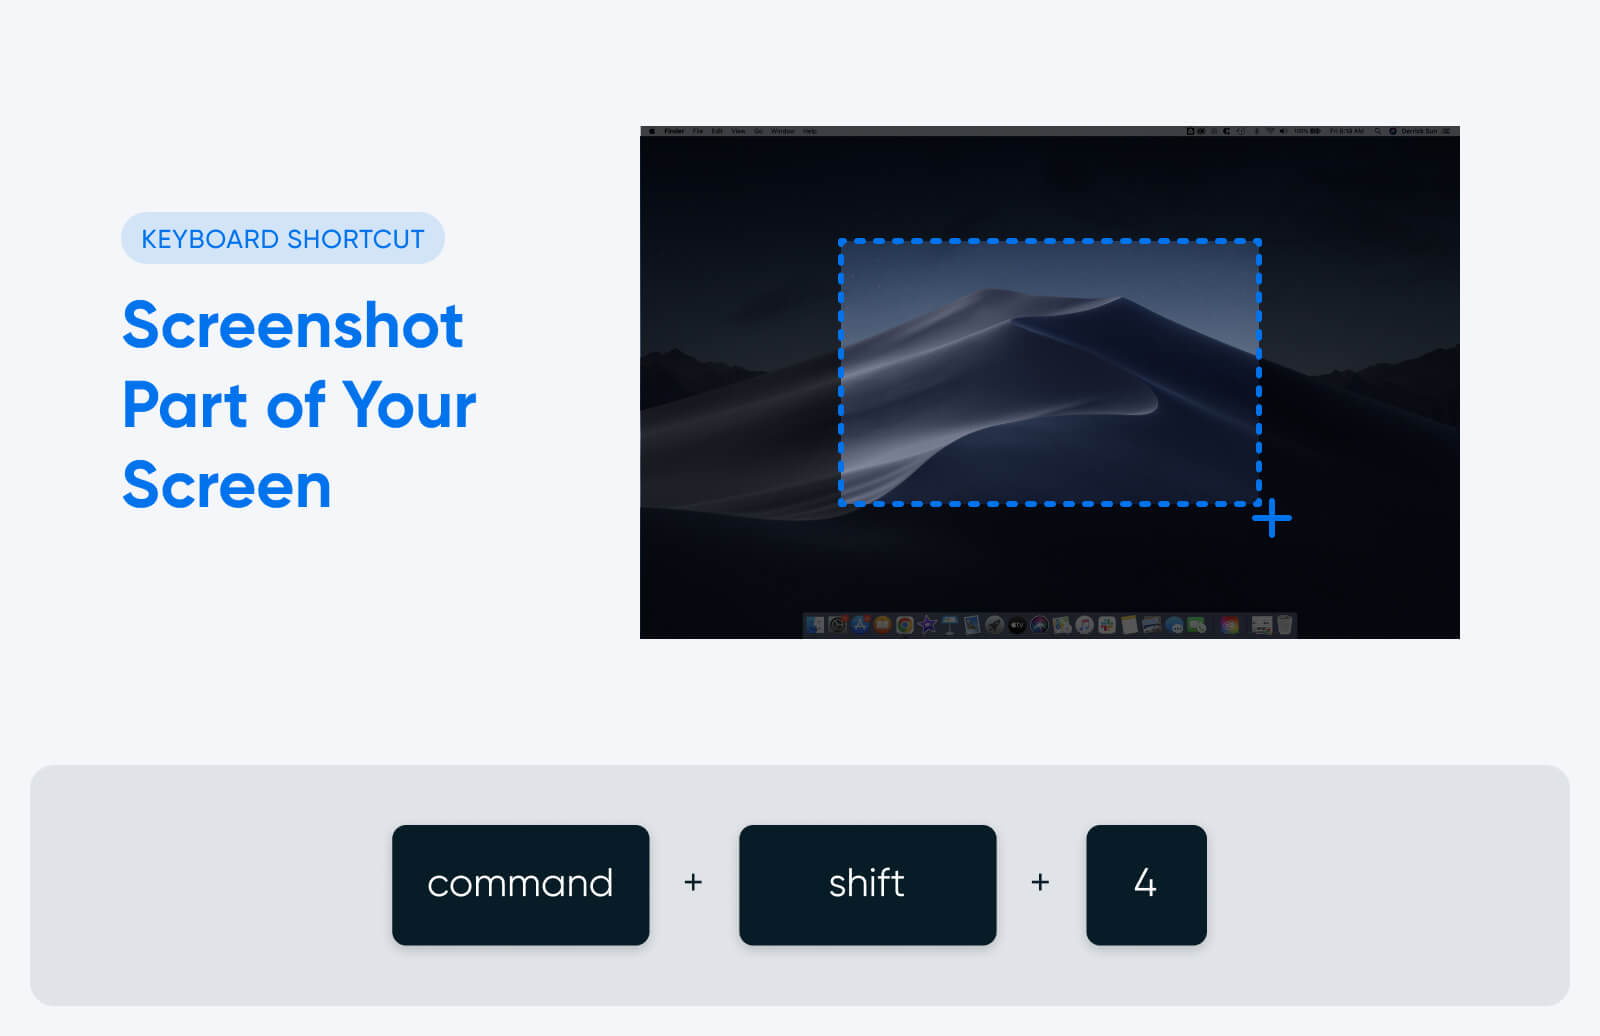 How to screenshot part of your screen on Mac